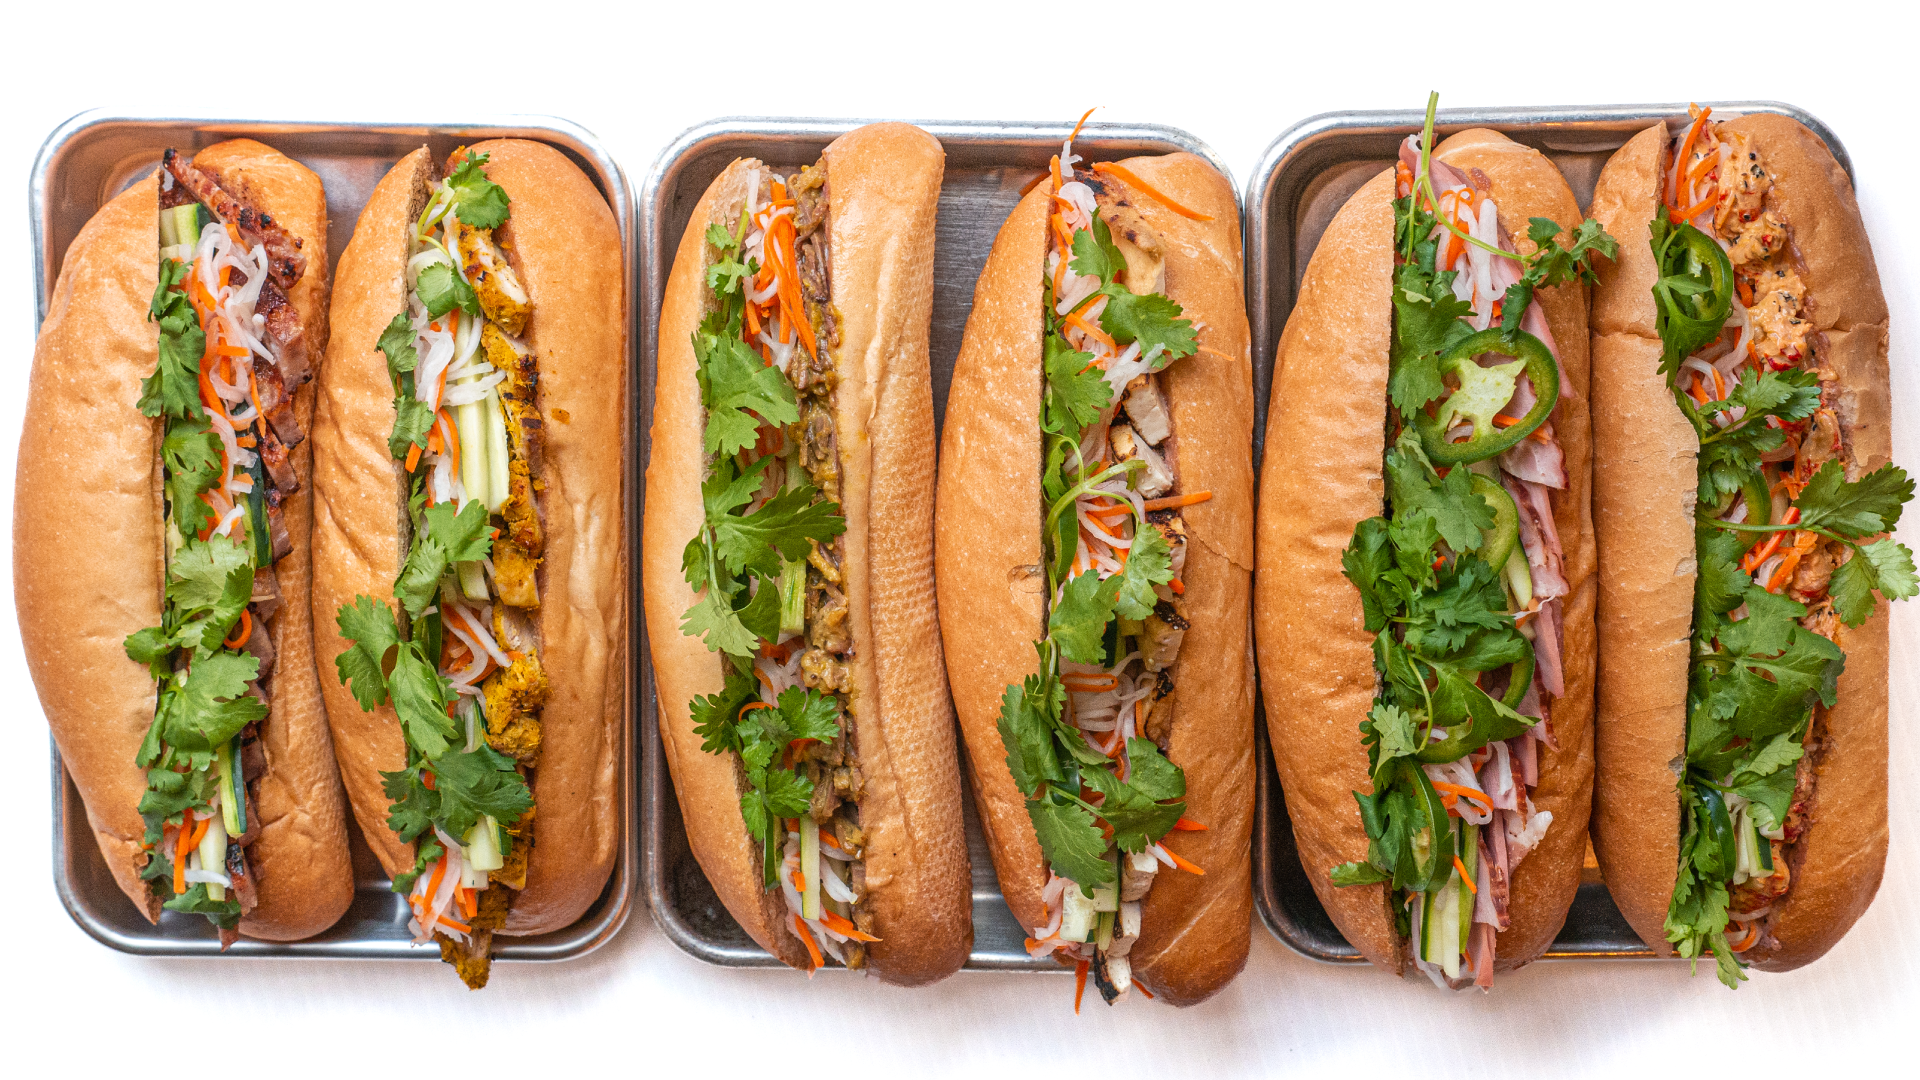 Overhead view of six Cambodian sandwiches on long sub rolls, arranged on small metal trays on a white background.